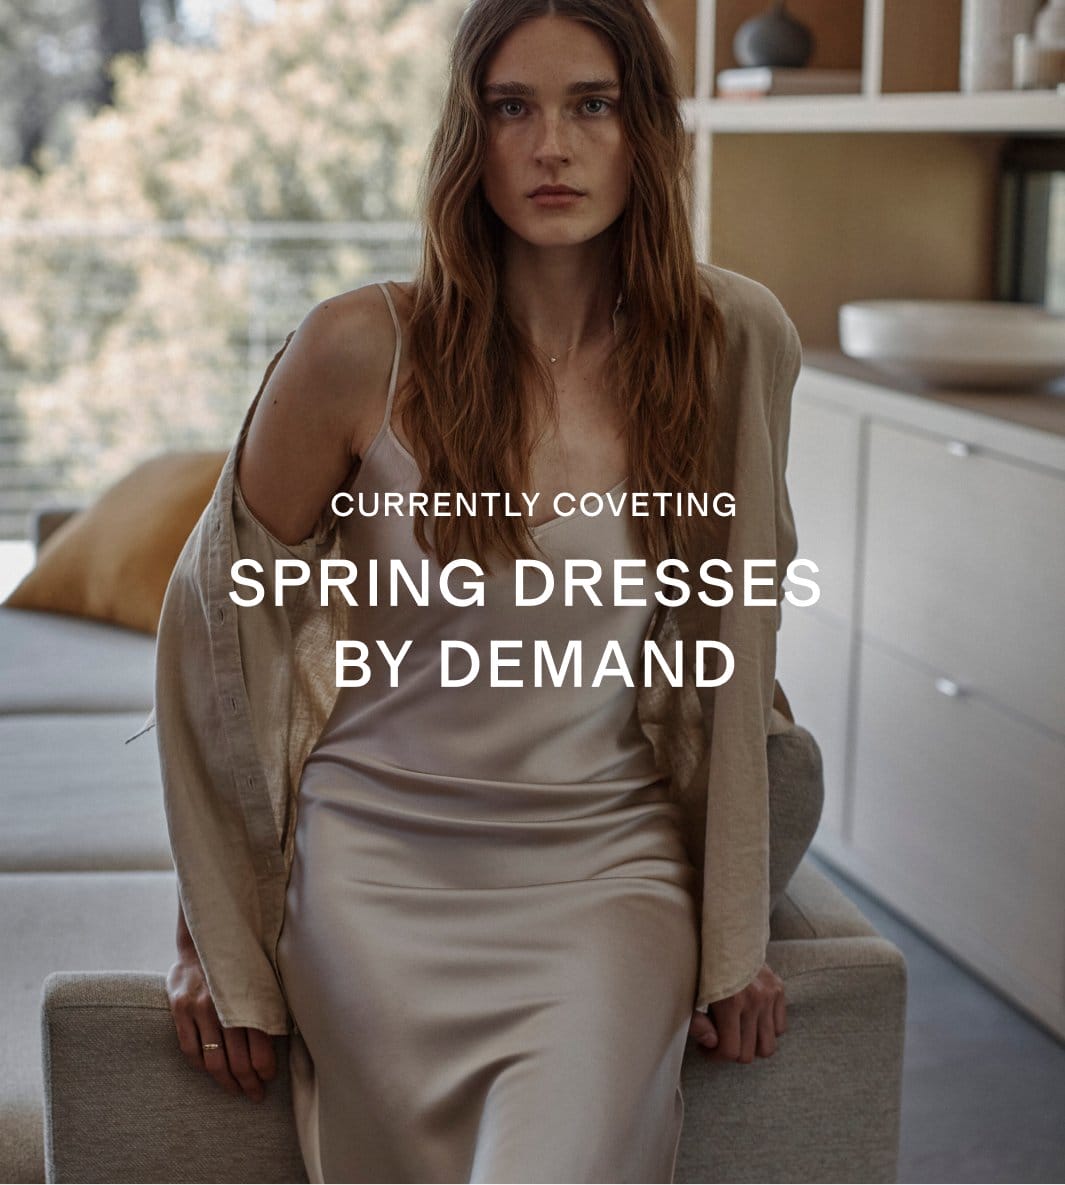 SPRING DRESSES BY DEMAND